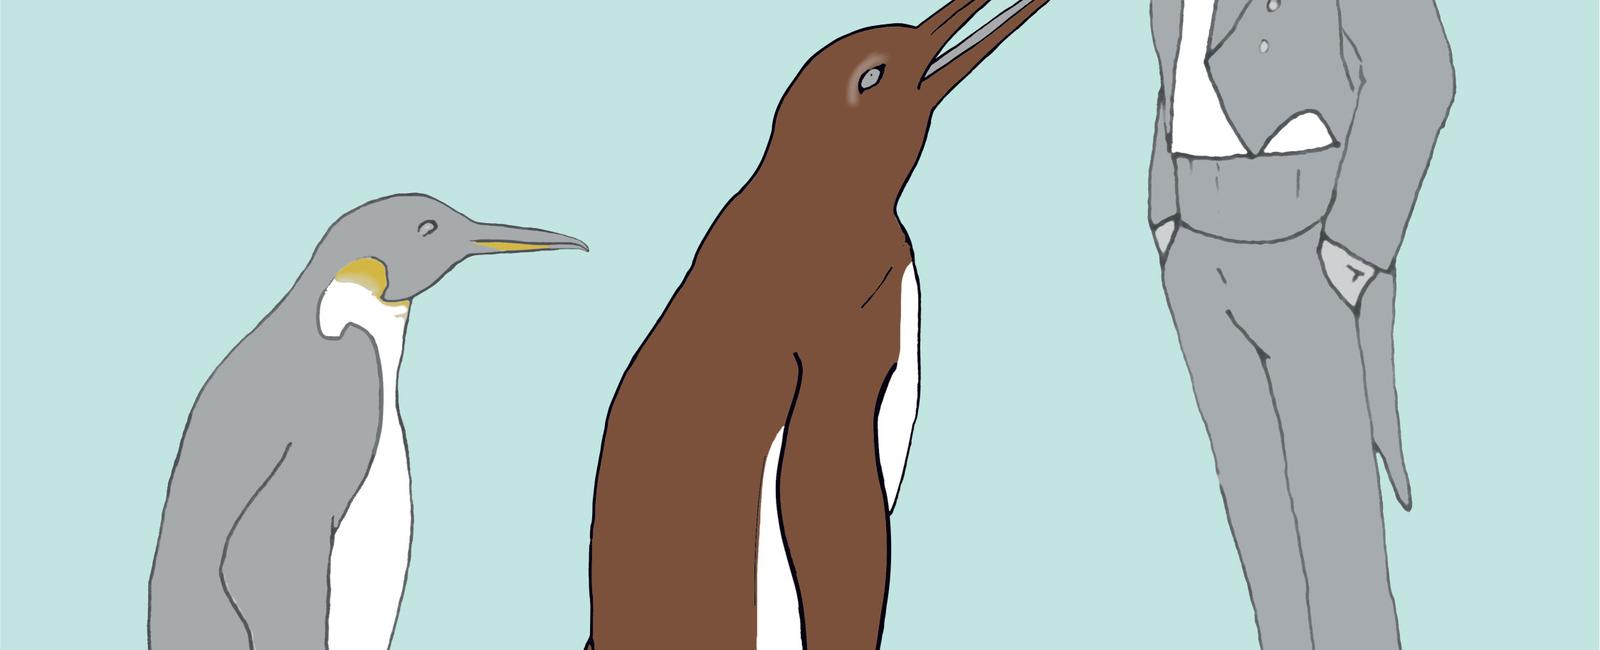 An extinct species of penguins was nearly 7 feet tall